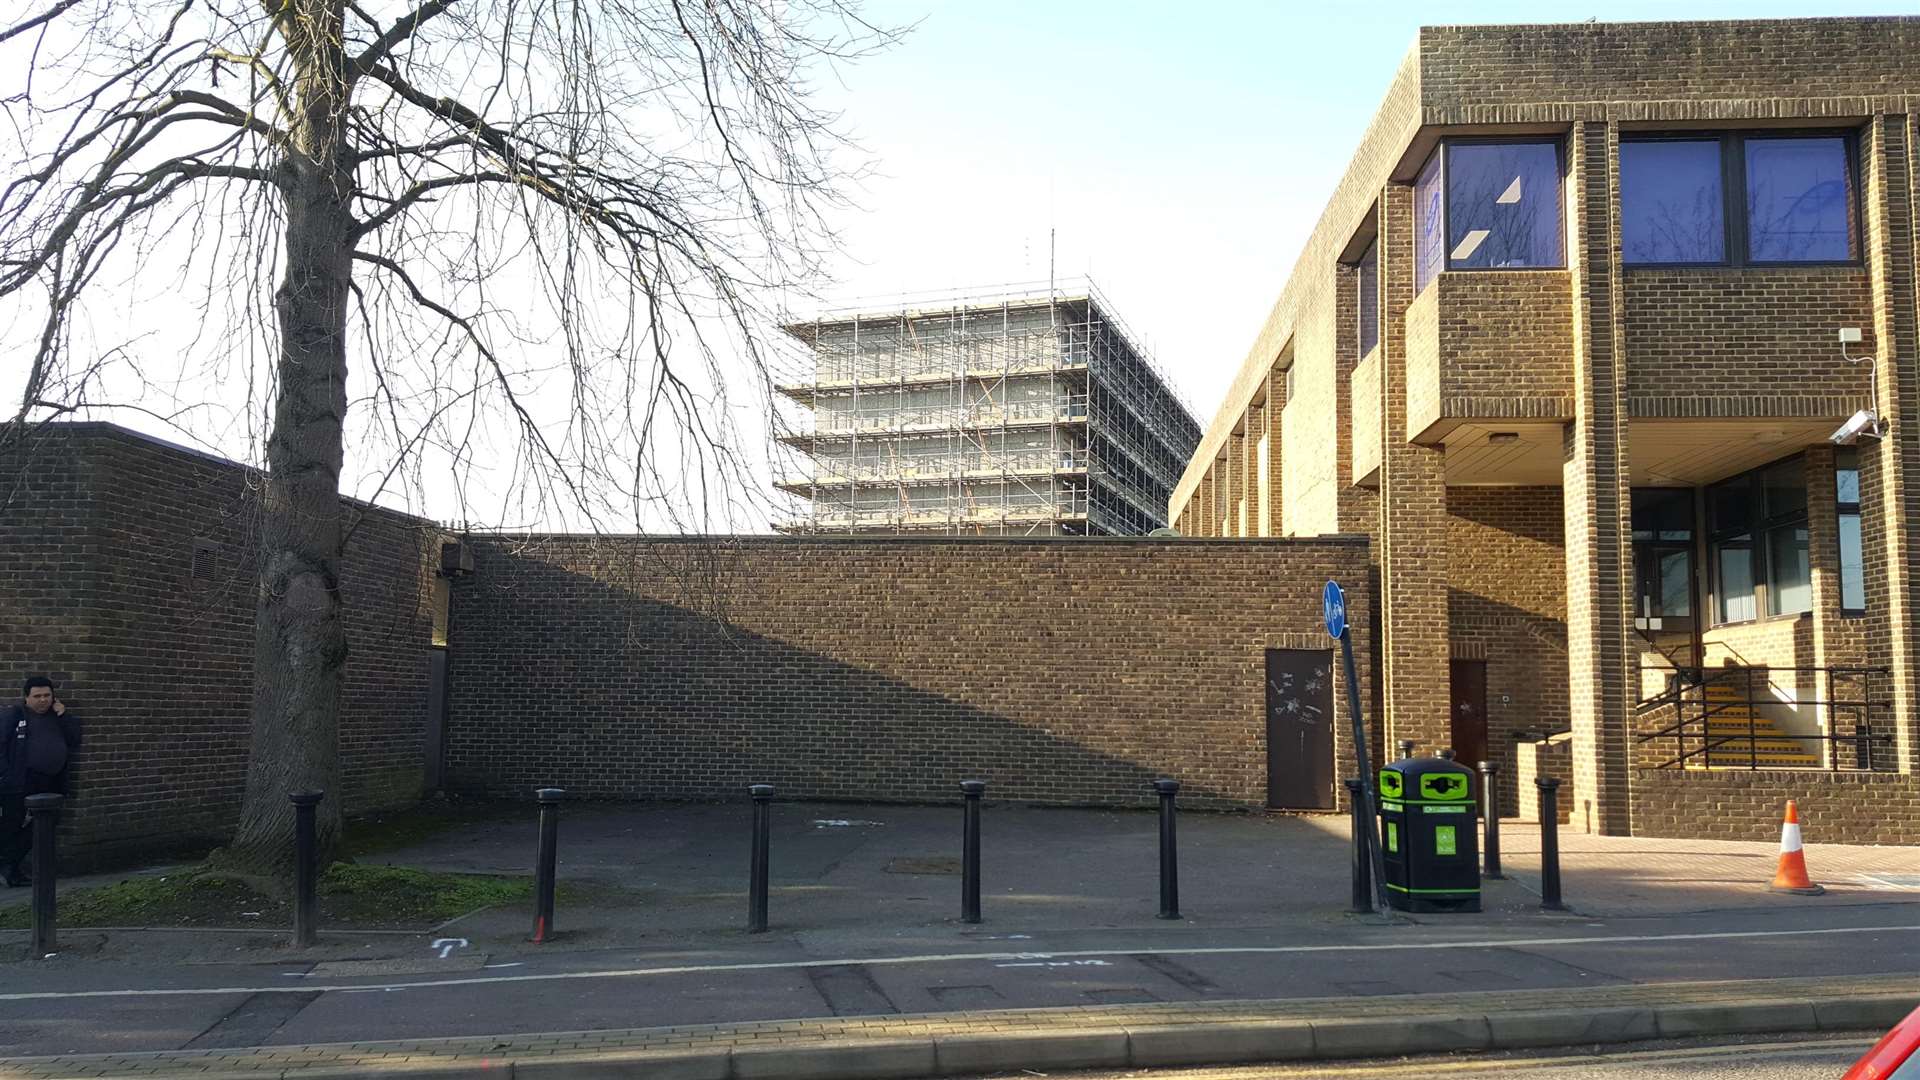 If approved, this is where the new Ashford police station entrance will go in Church Road